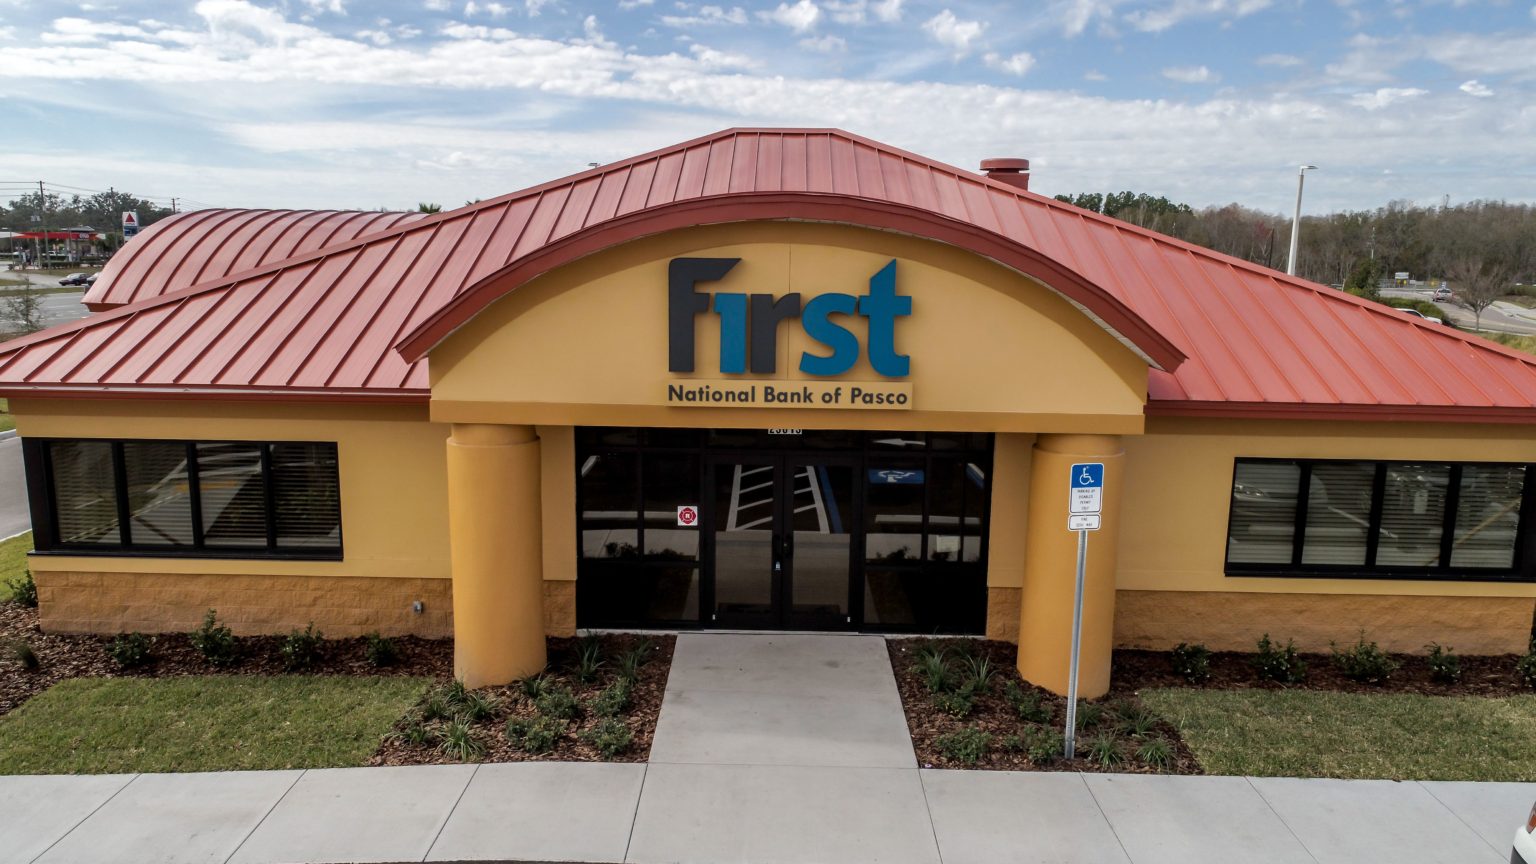 First-National-Bank-of-Pasco-Lutz-Florida-Andrew-Pavalis-1536x864